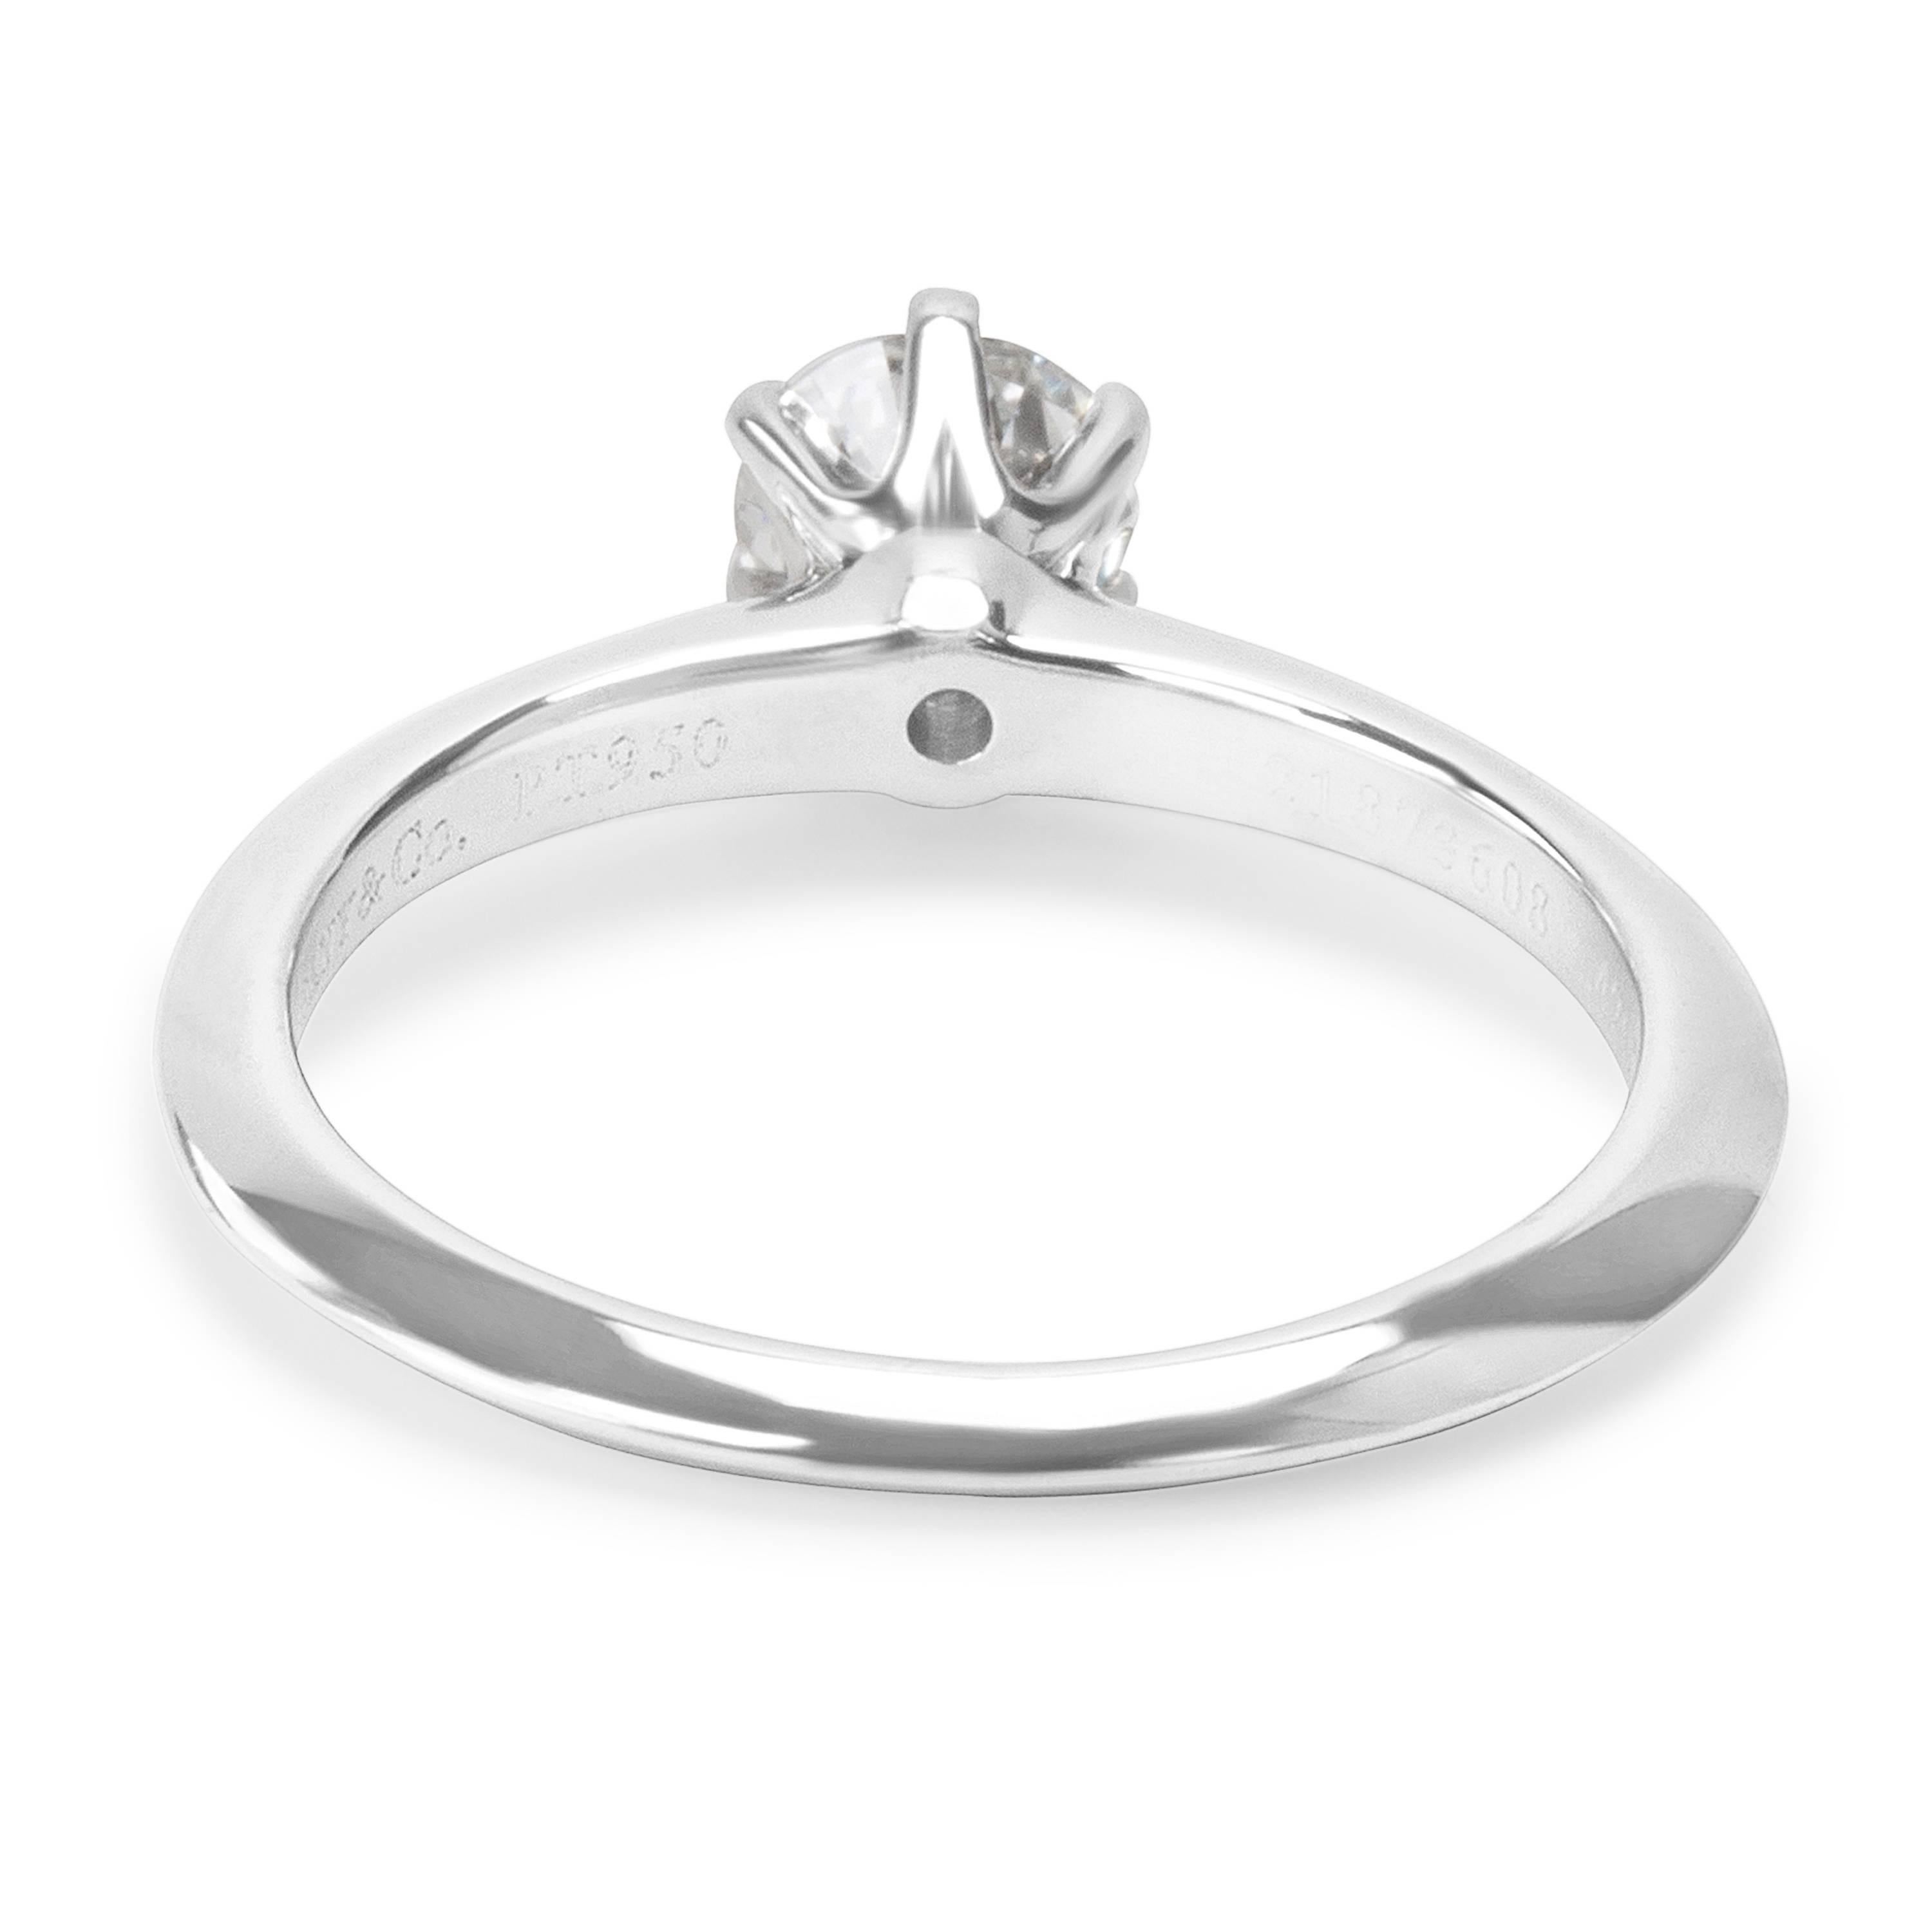 Modern Tiffany & Co. Diamond Solitaire Engagement Ring in Platinum 0.42 Carat